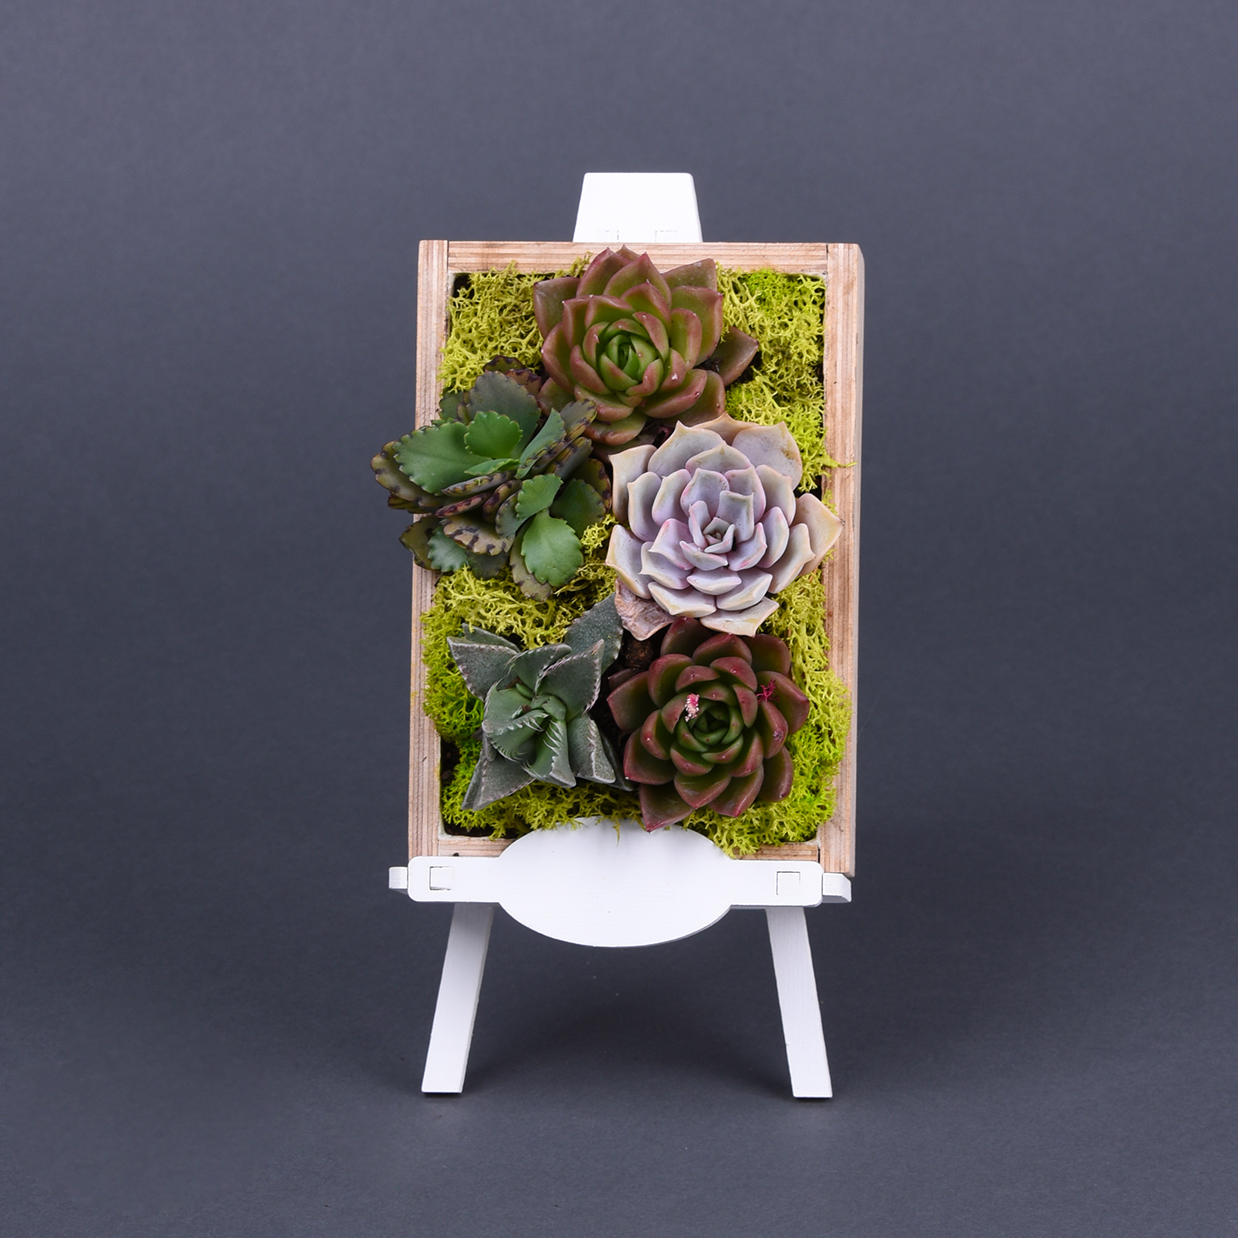 Workshop 'Creating a mini living picture with a mix of succulents'